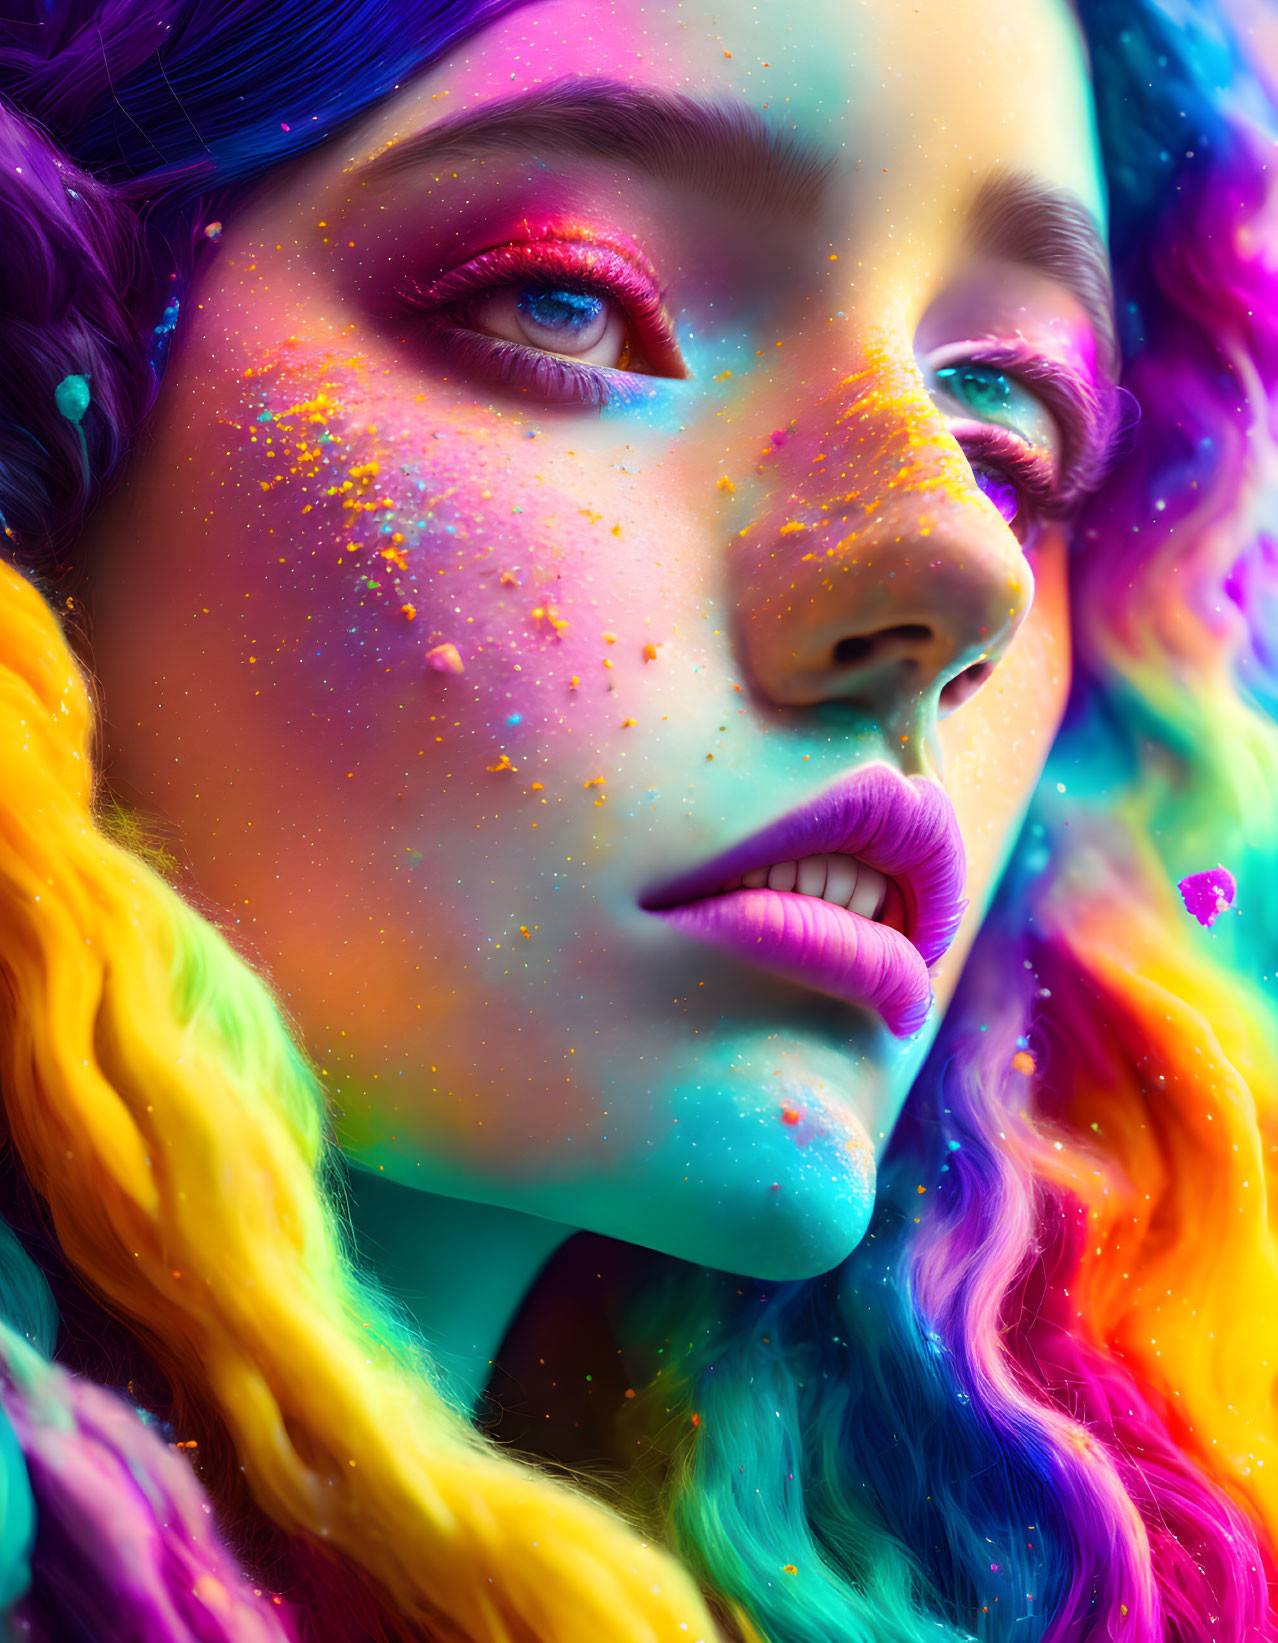 Colorful portrait of person with iridescent skin, rainbow hair, and glitter makeup